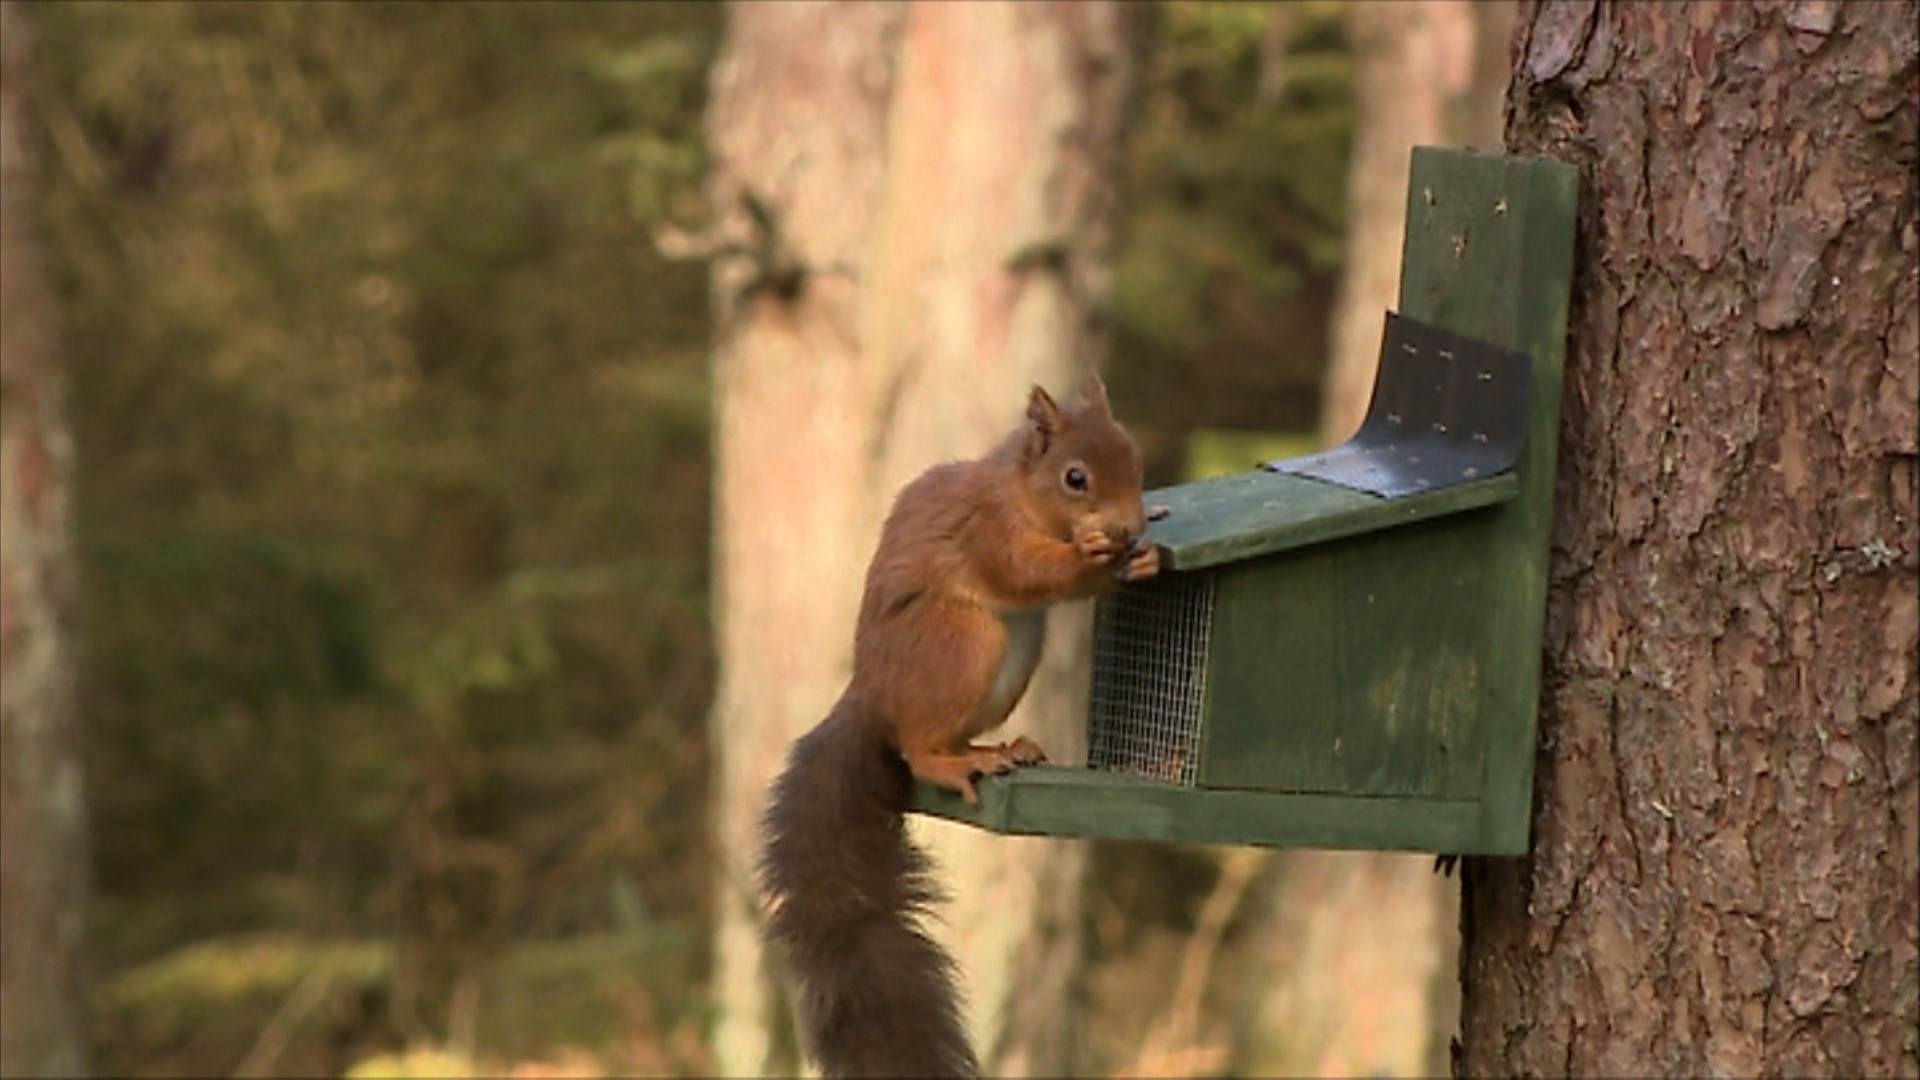 Red squirrels are able to largely avoid the danger posed by pine martens